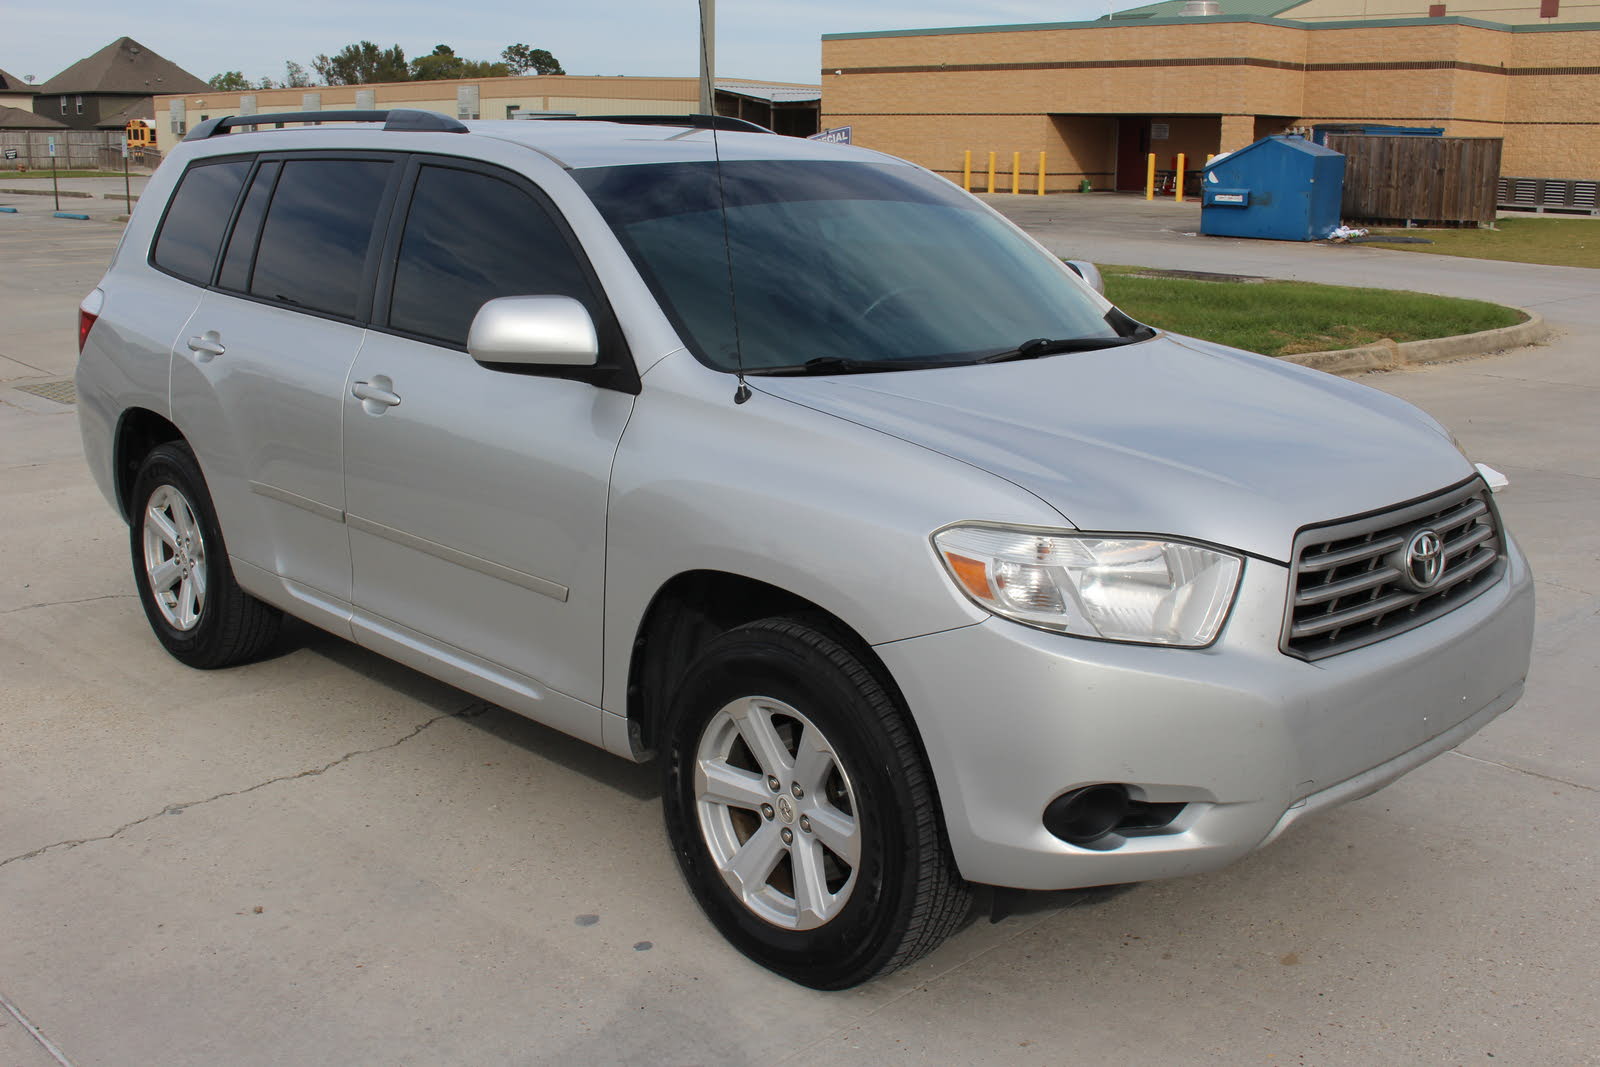 Used 2010 toyota highlander limited with awd/4wd, tire pressure warning, au...